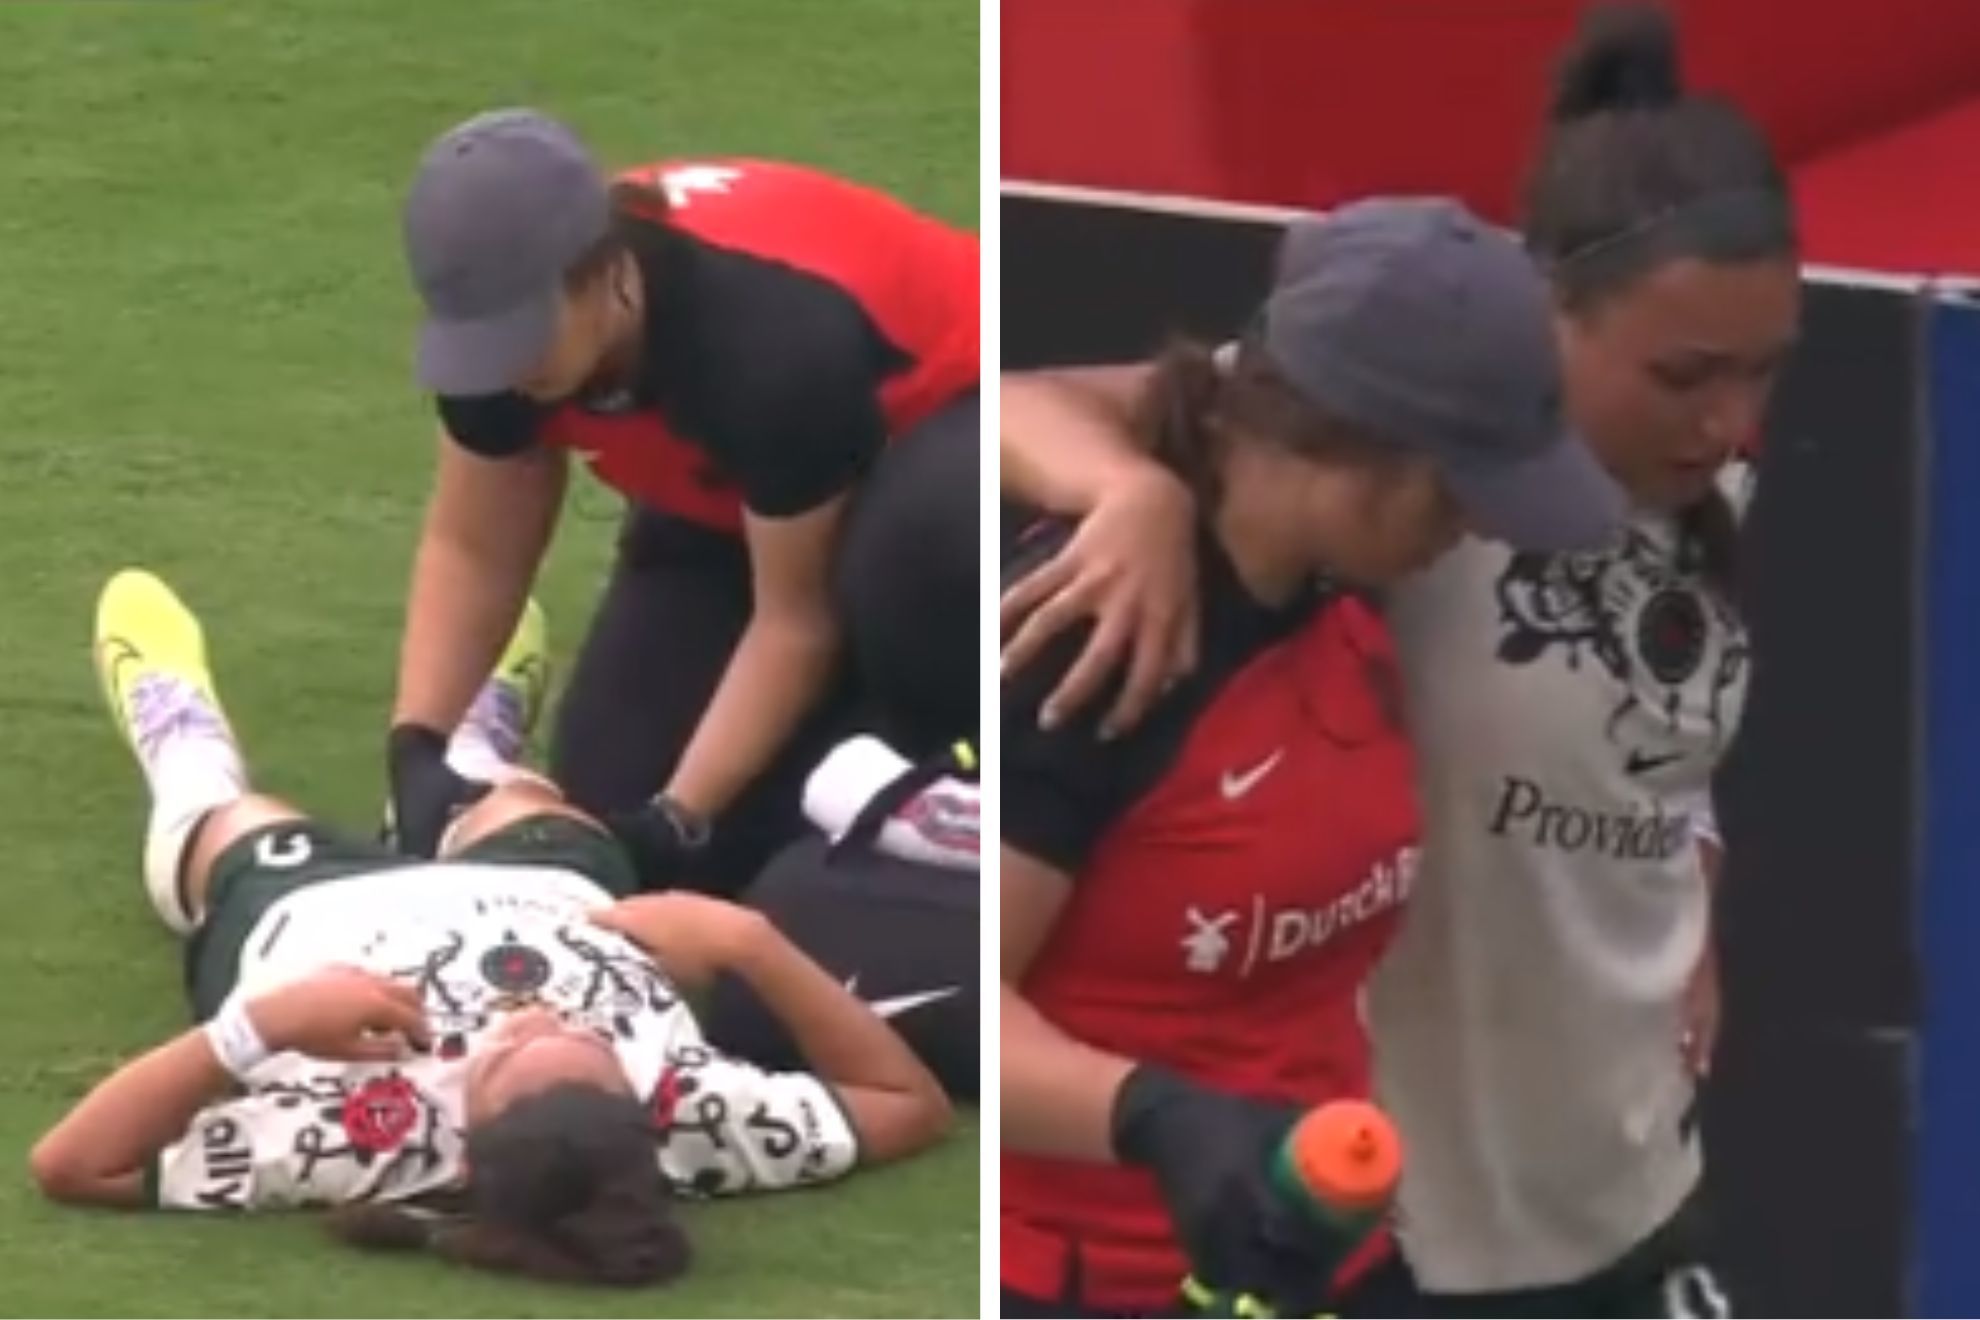 Sophia Smith in tears as she limps off field with apparent right knee injury